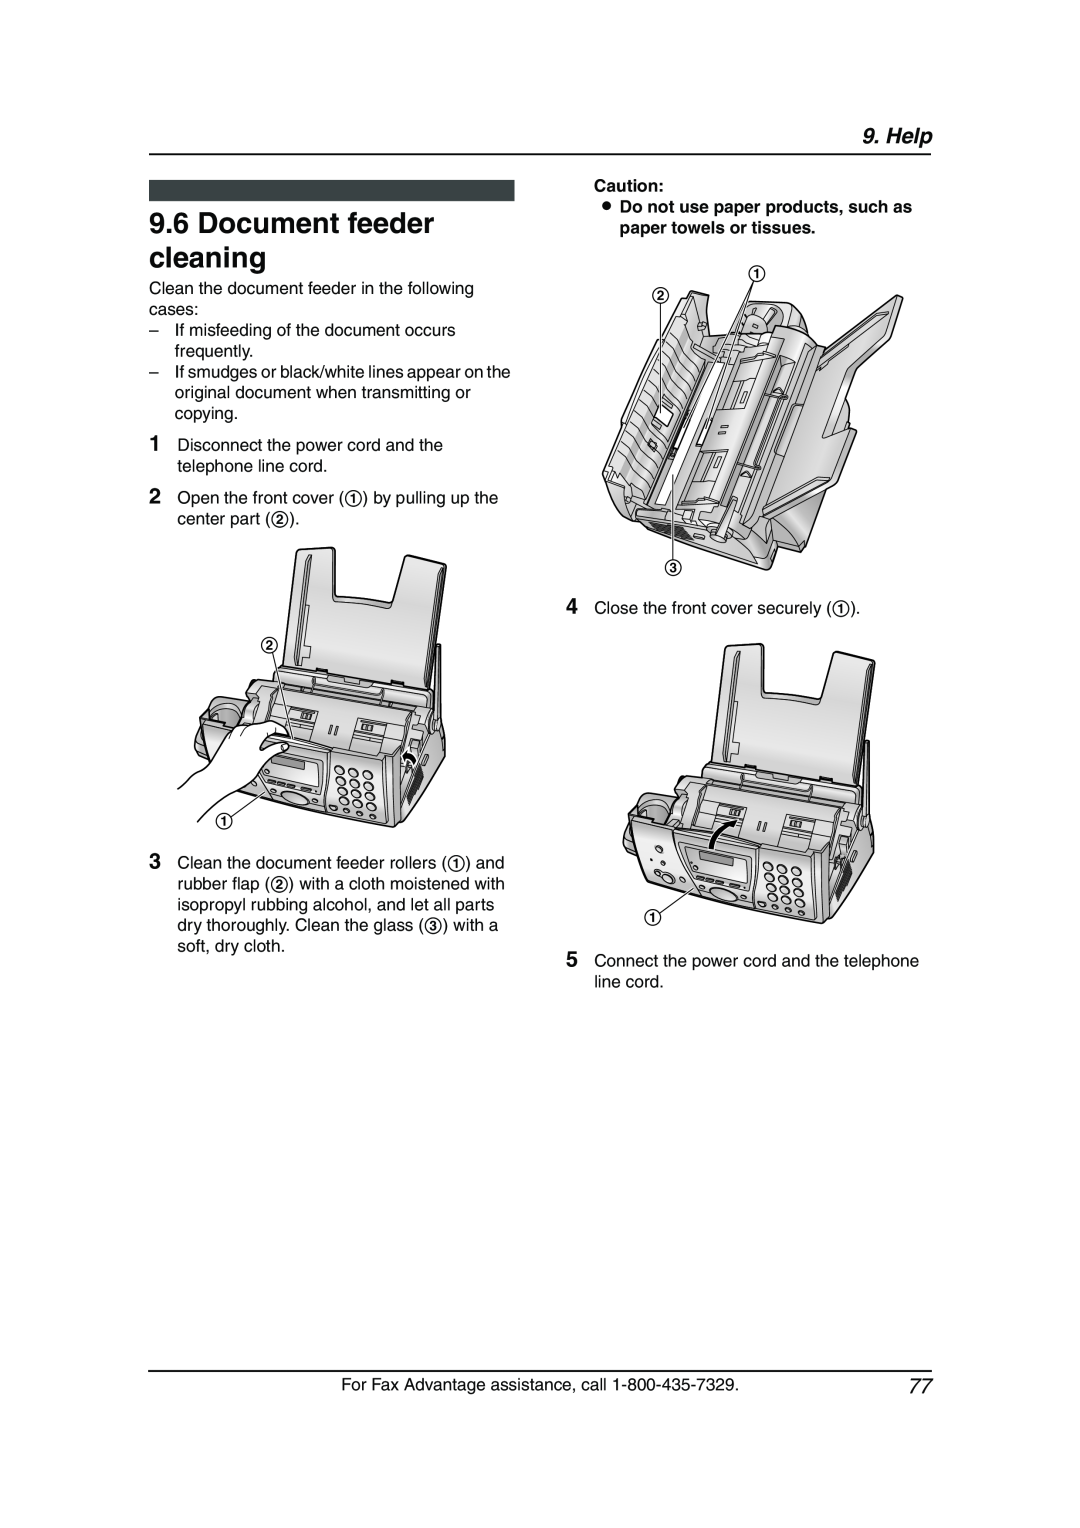 Panasonic KX-FPG377 manual Document feeder cleaning, Help, L Do not use paper products, such as paper towels or tissues 